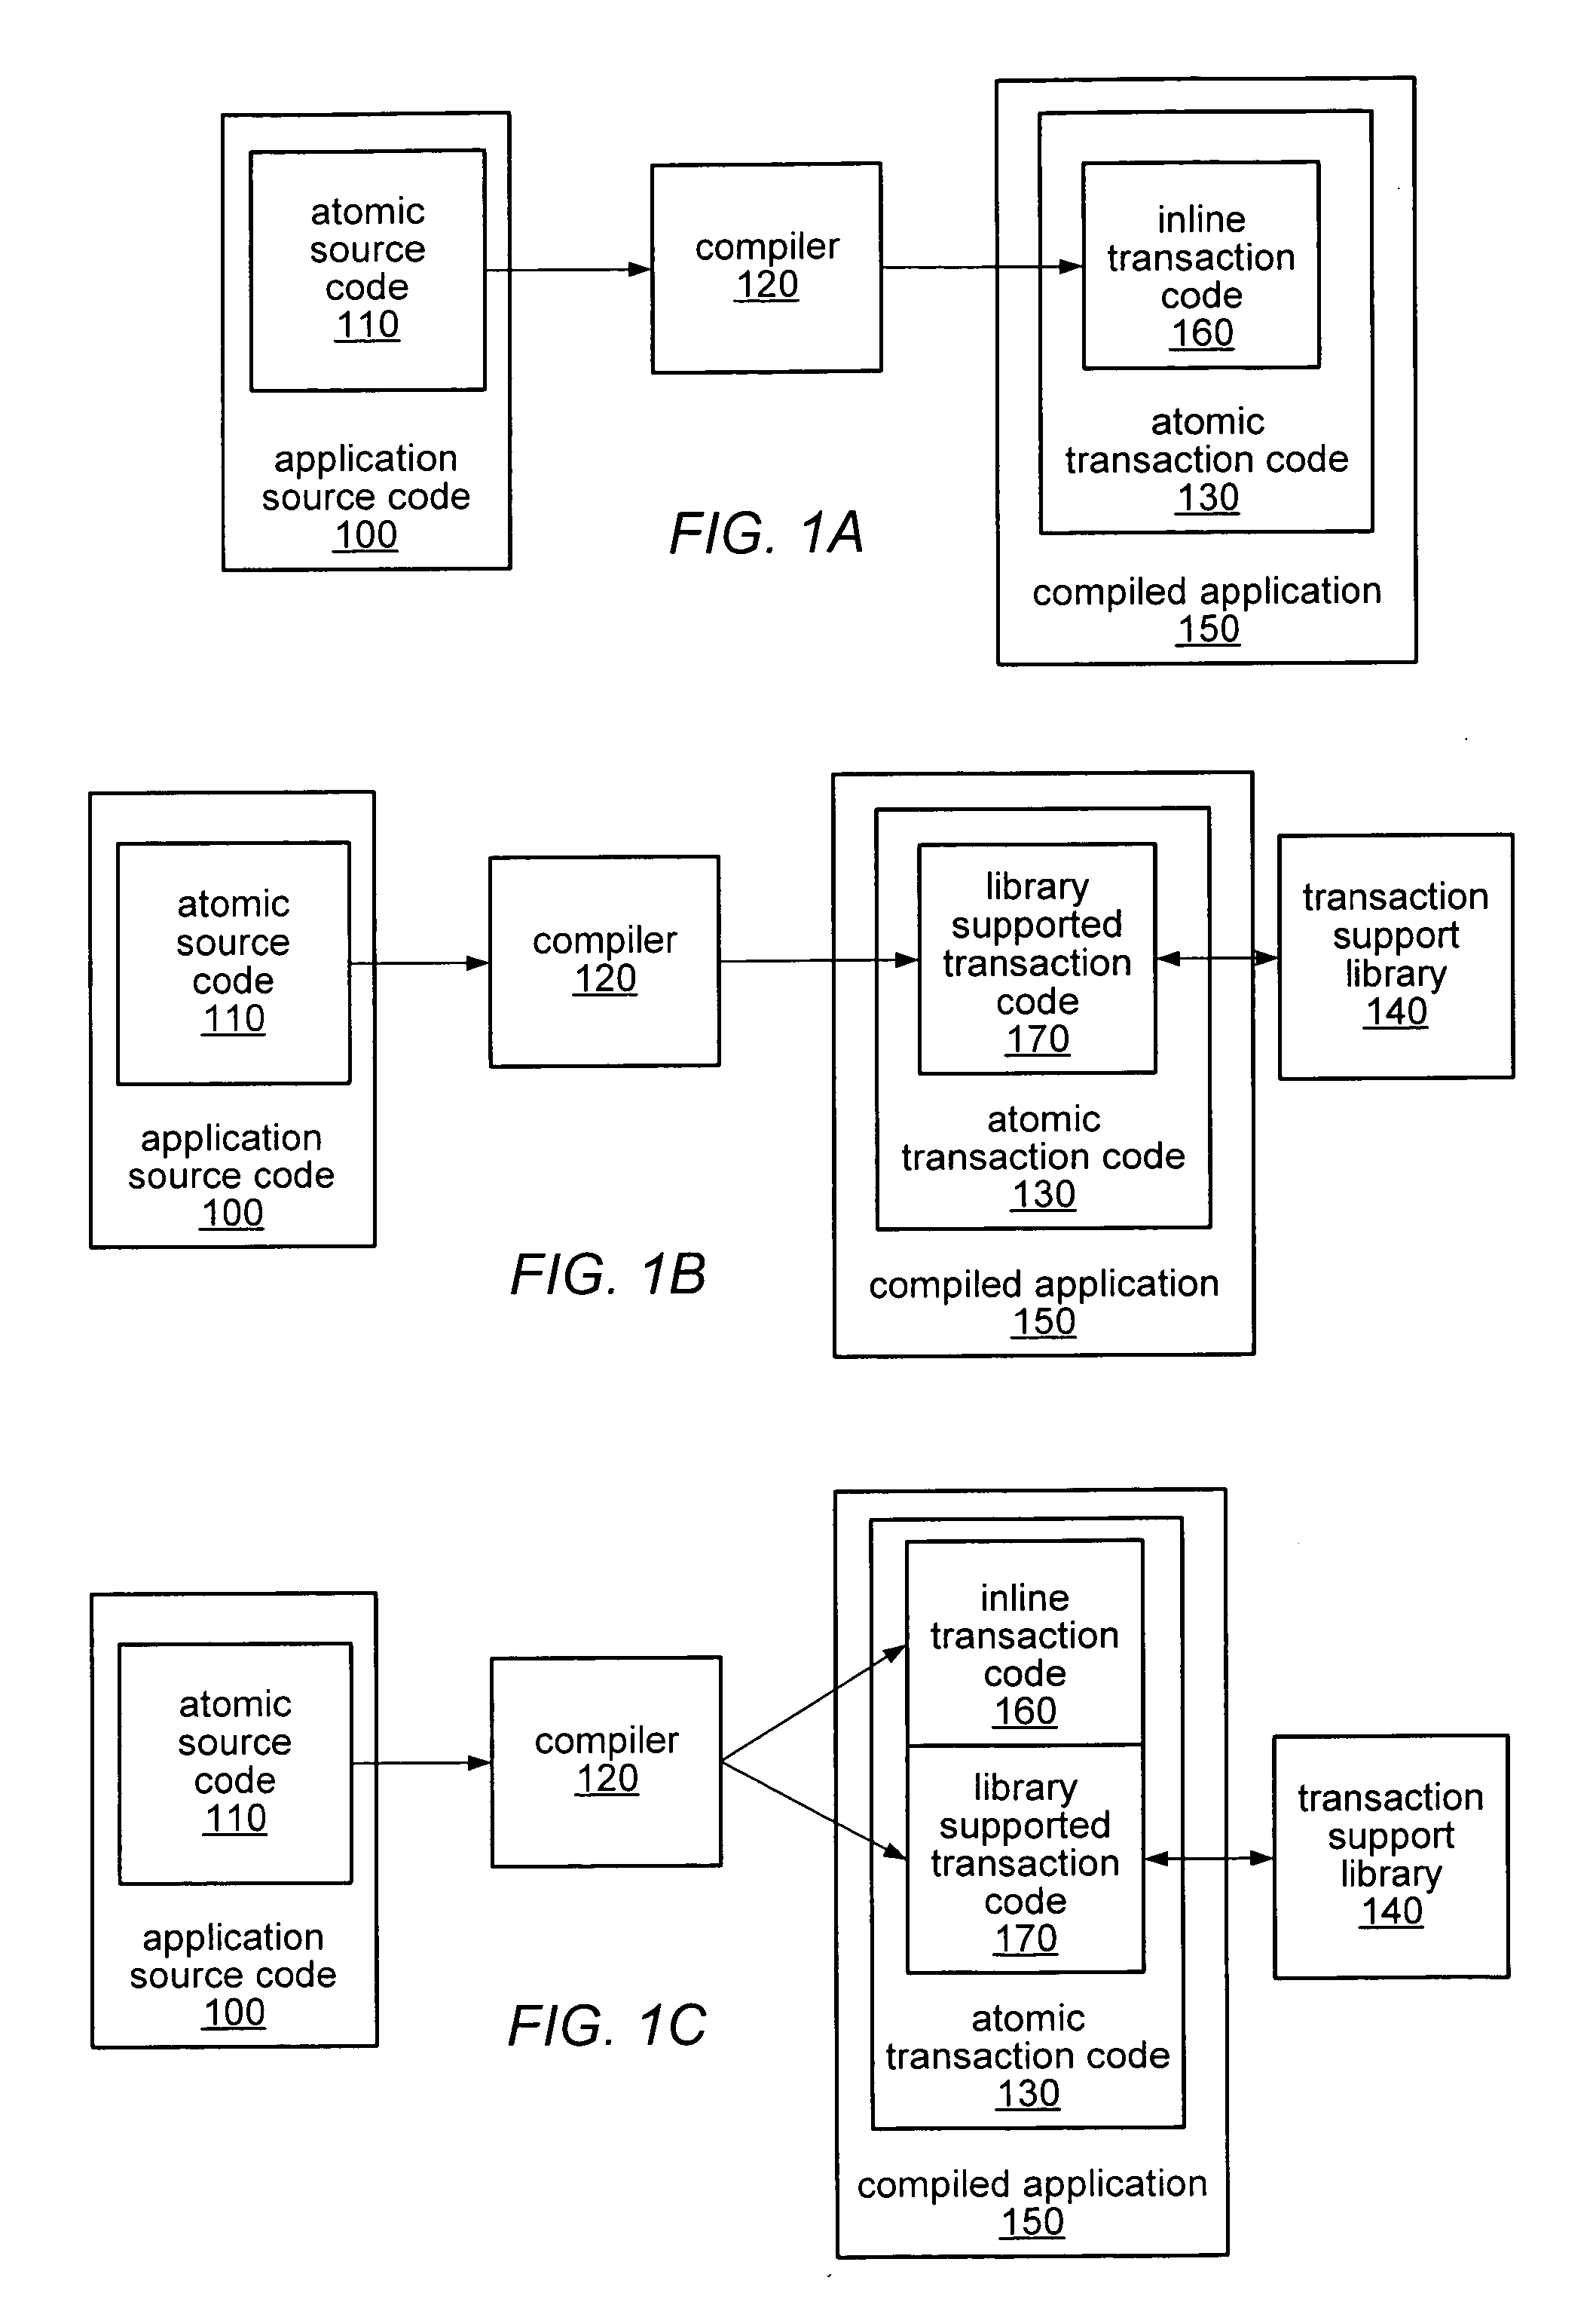 System and method for supporting multiple alternative methods for executing transactions